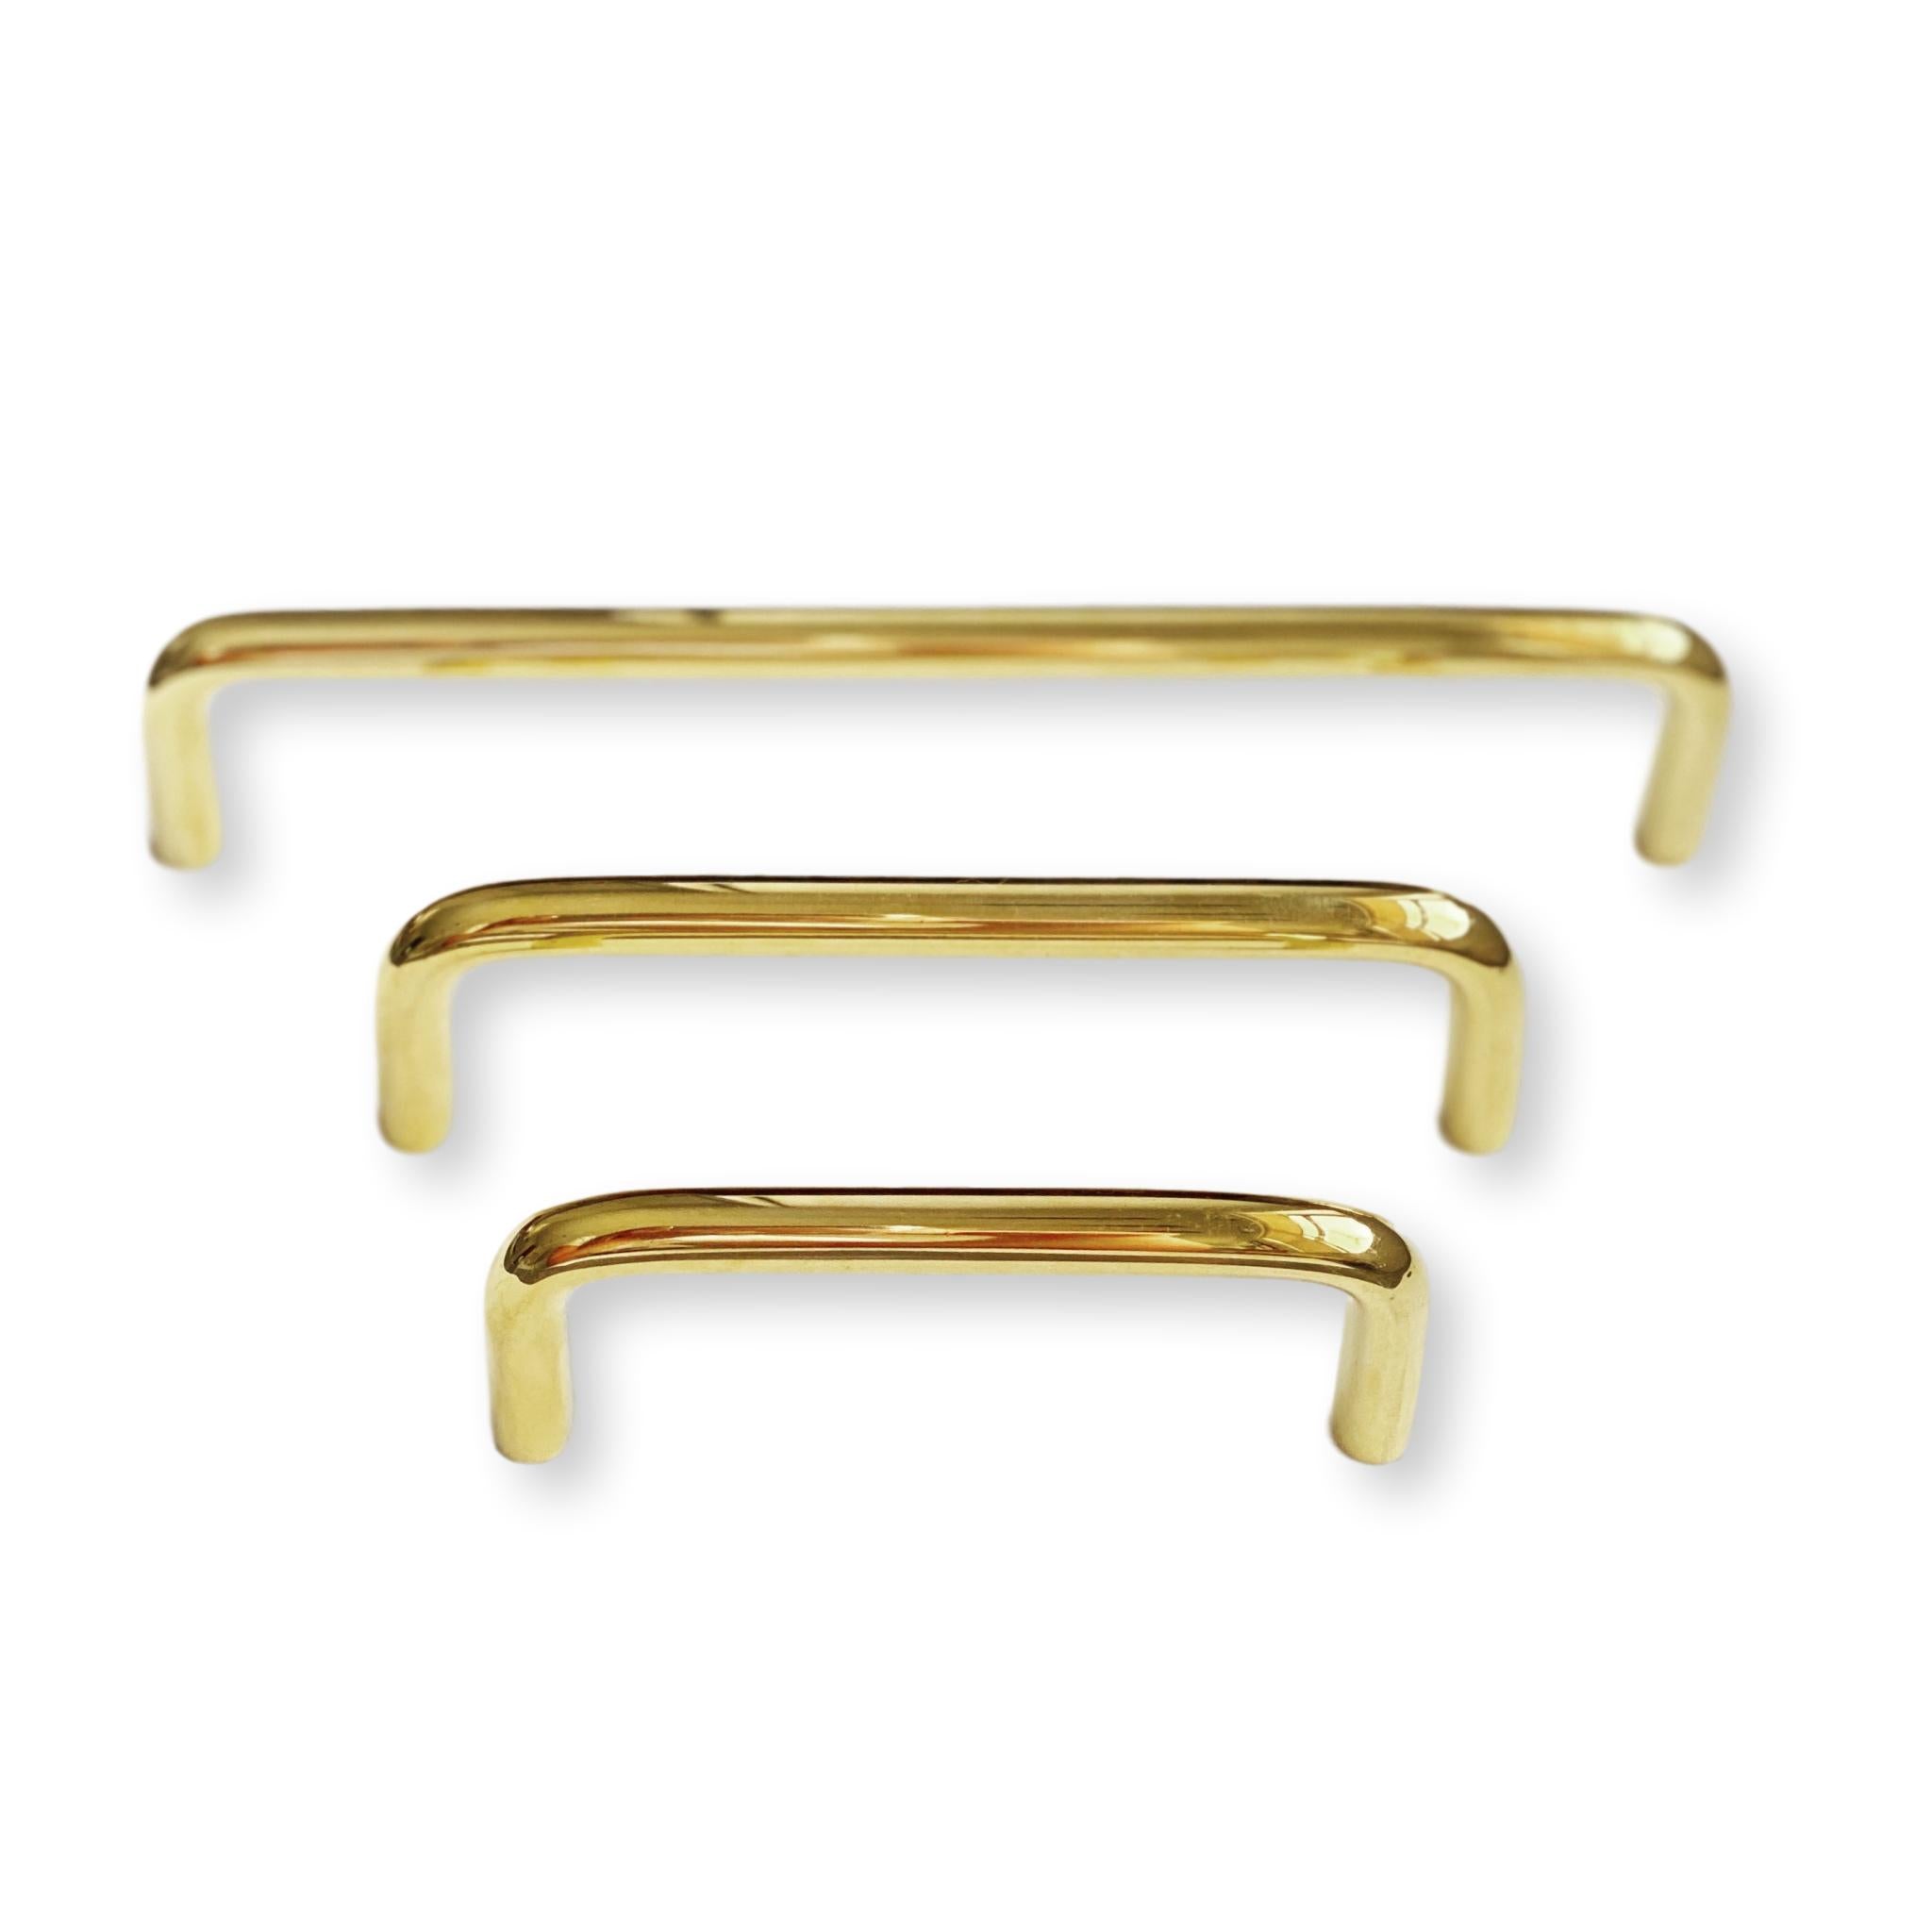 Polished Brass "Wire" Drawer Pulls - Cabinet Handles | Drawer Pull